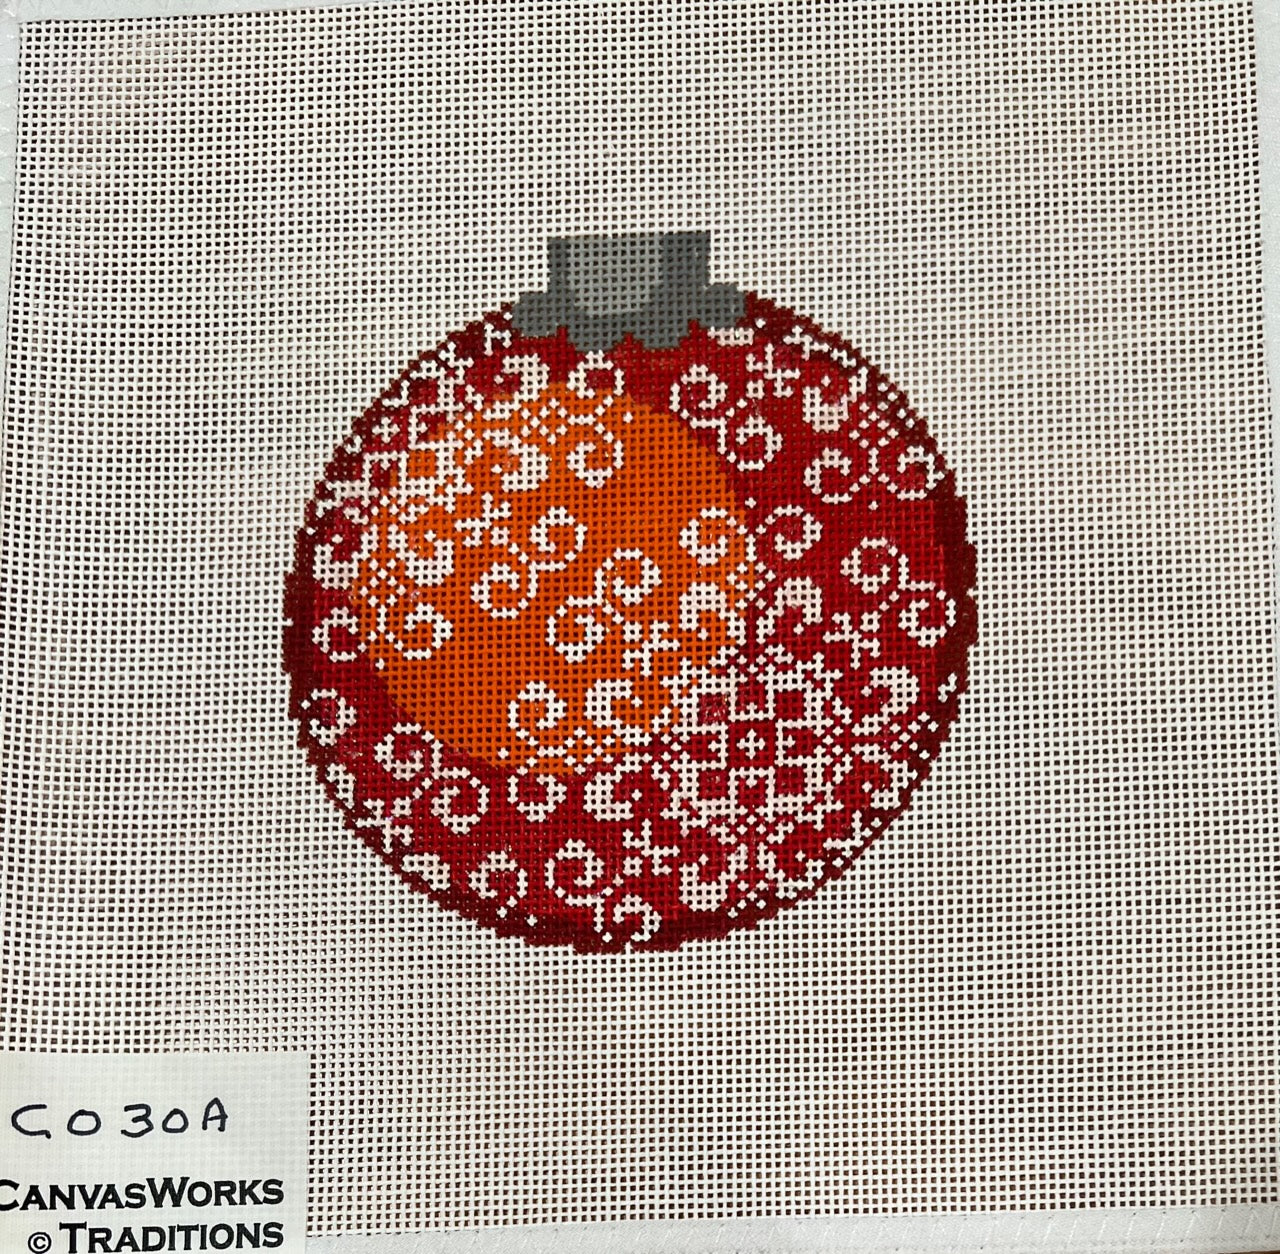 Canvas Works CO 30A-G Snowflake Ornament